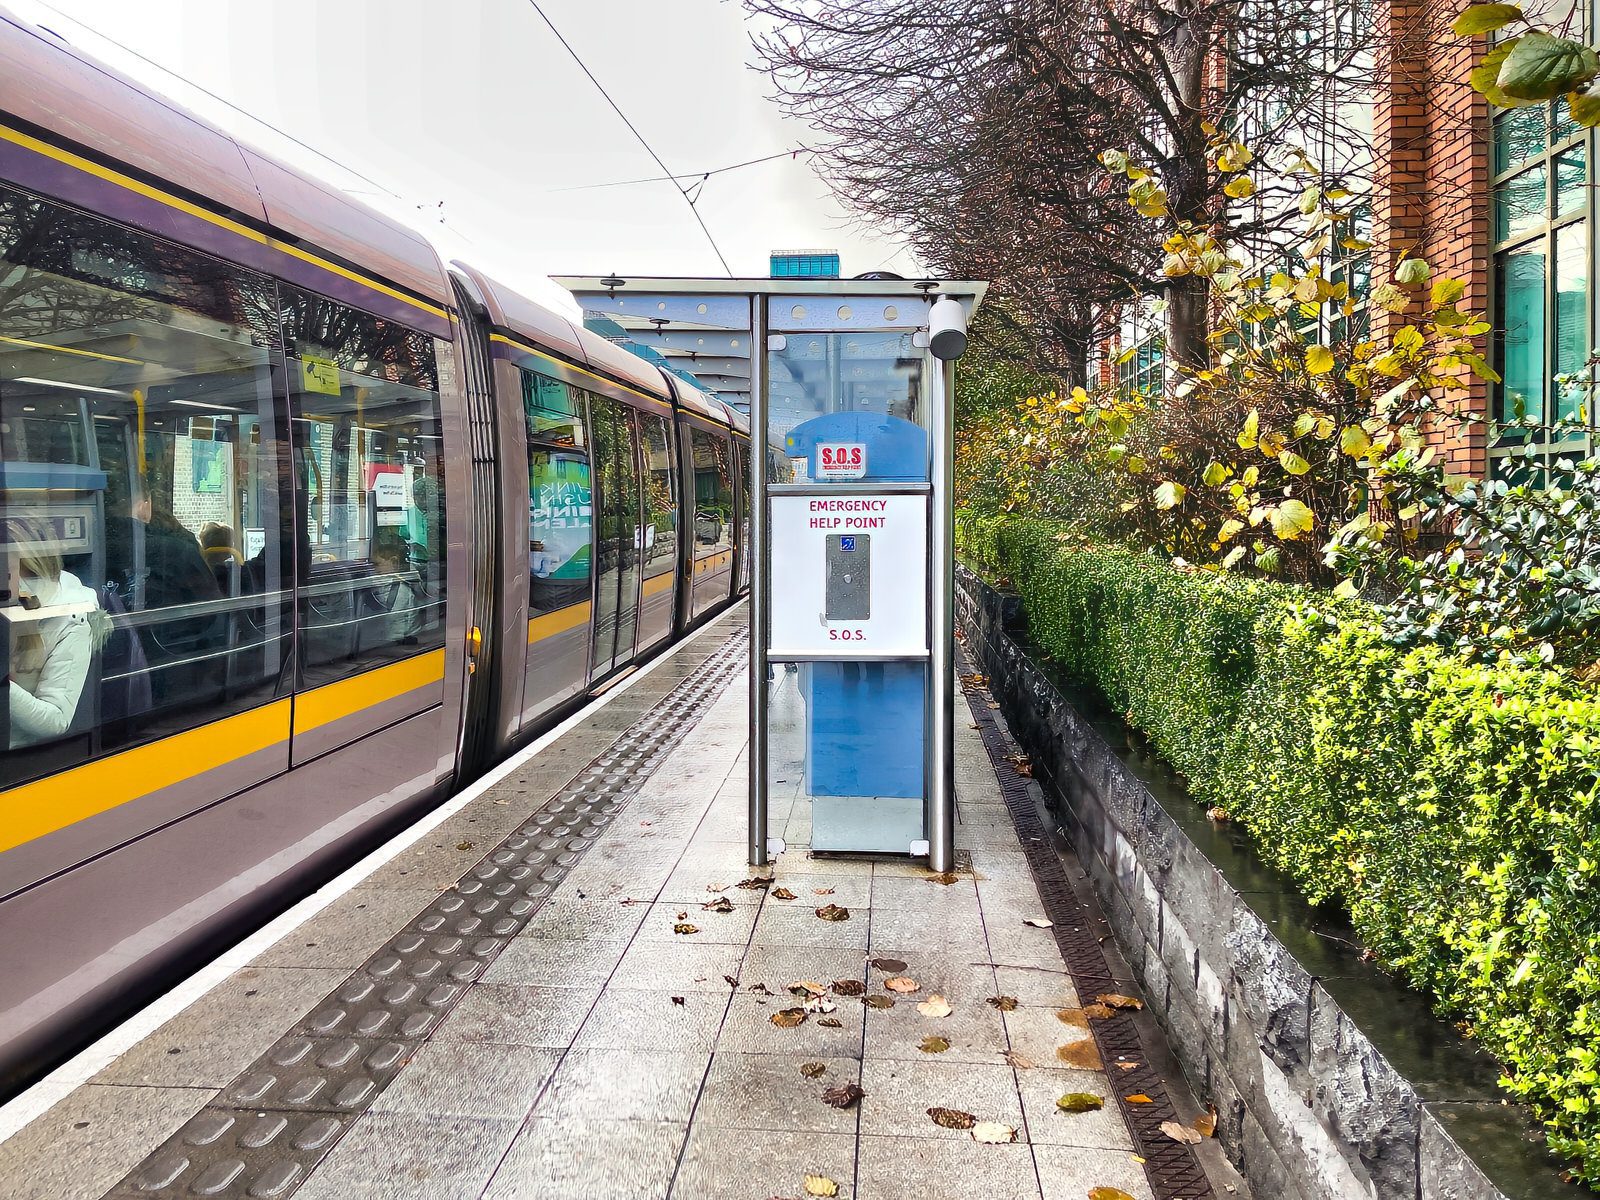 THE LUAS TRAM STOP AT GEORGE'S DOCK 011